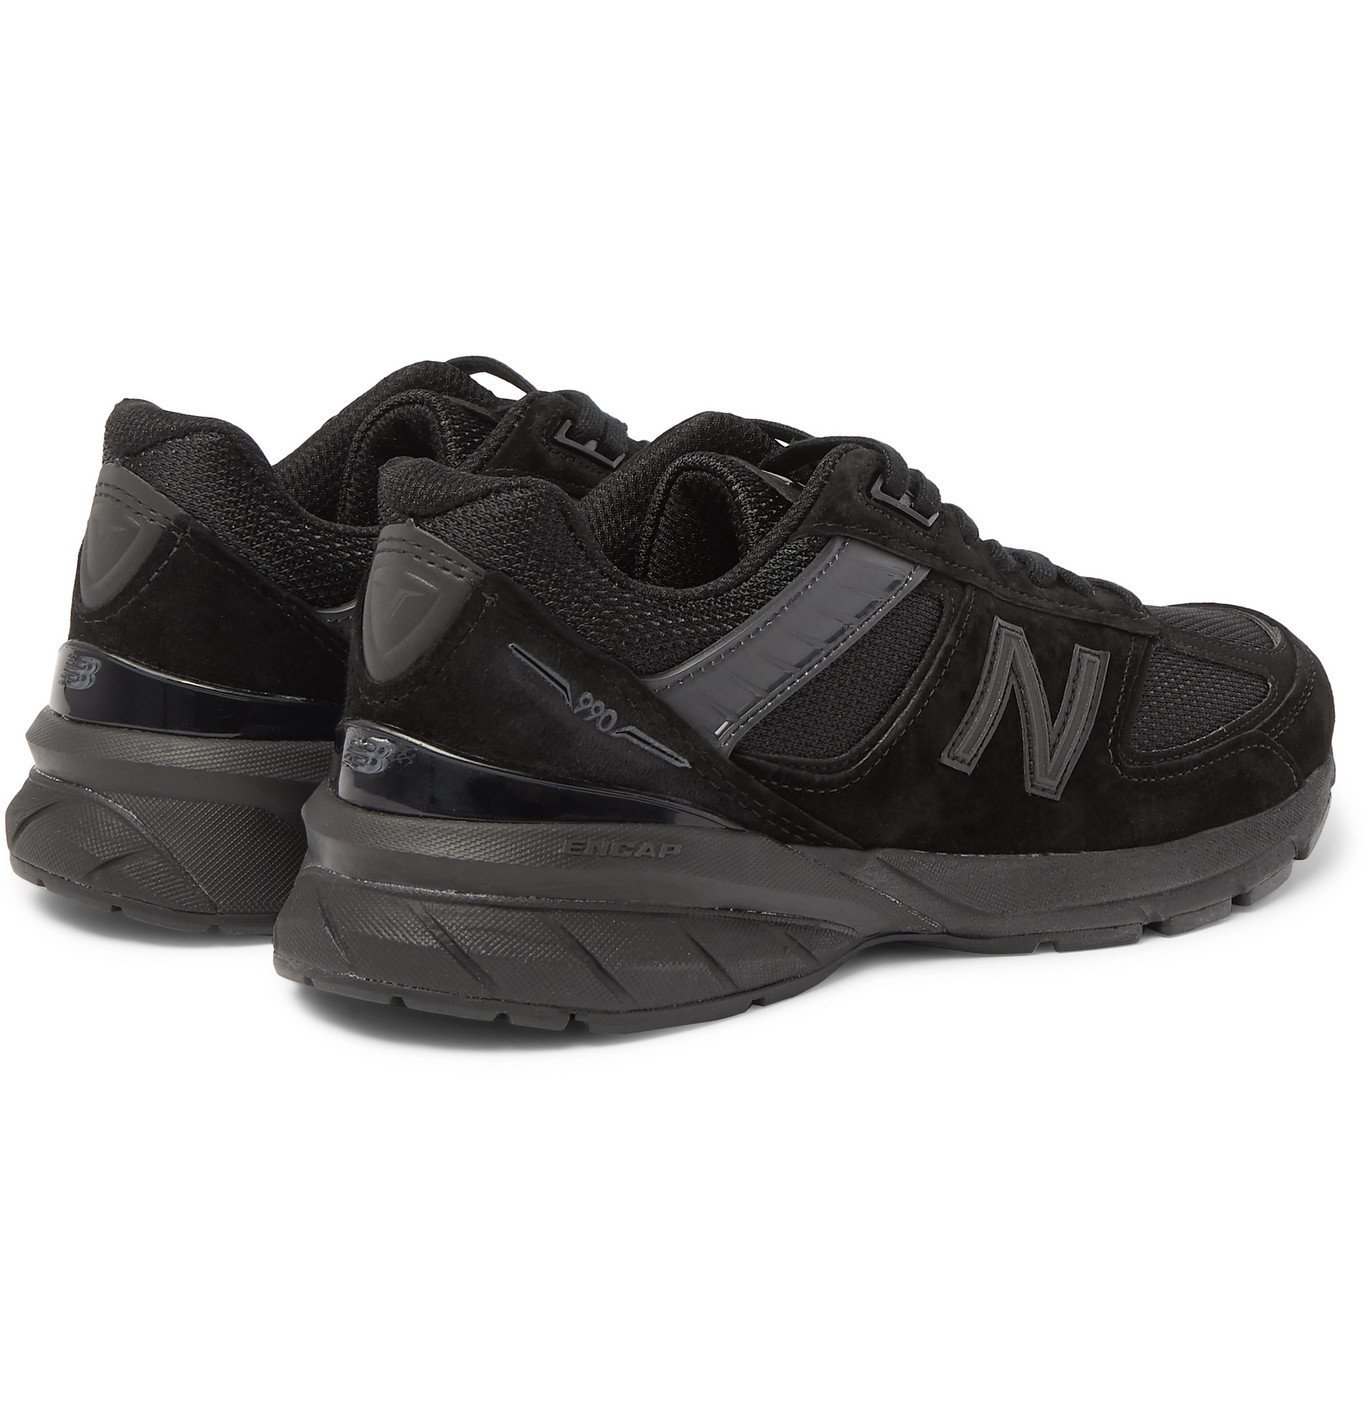 New Balance - M990v5 Rubber-Trimmed Suede and Mesh Sneakers - Black